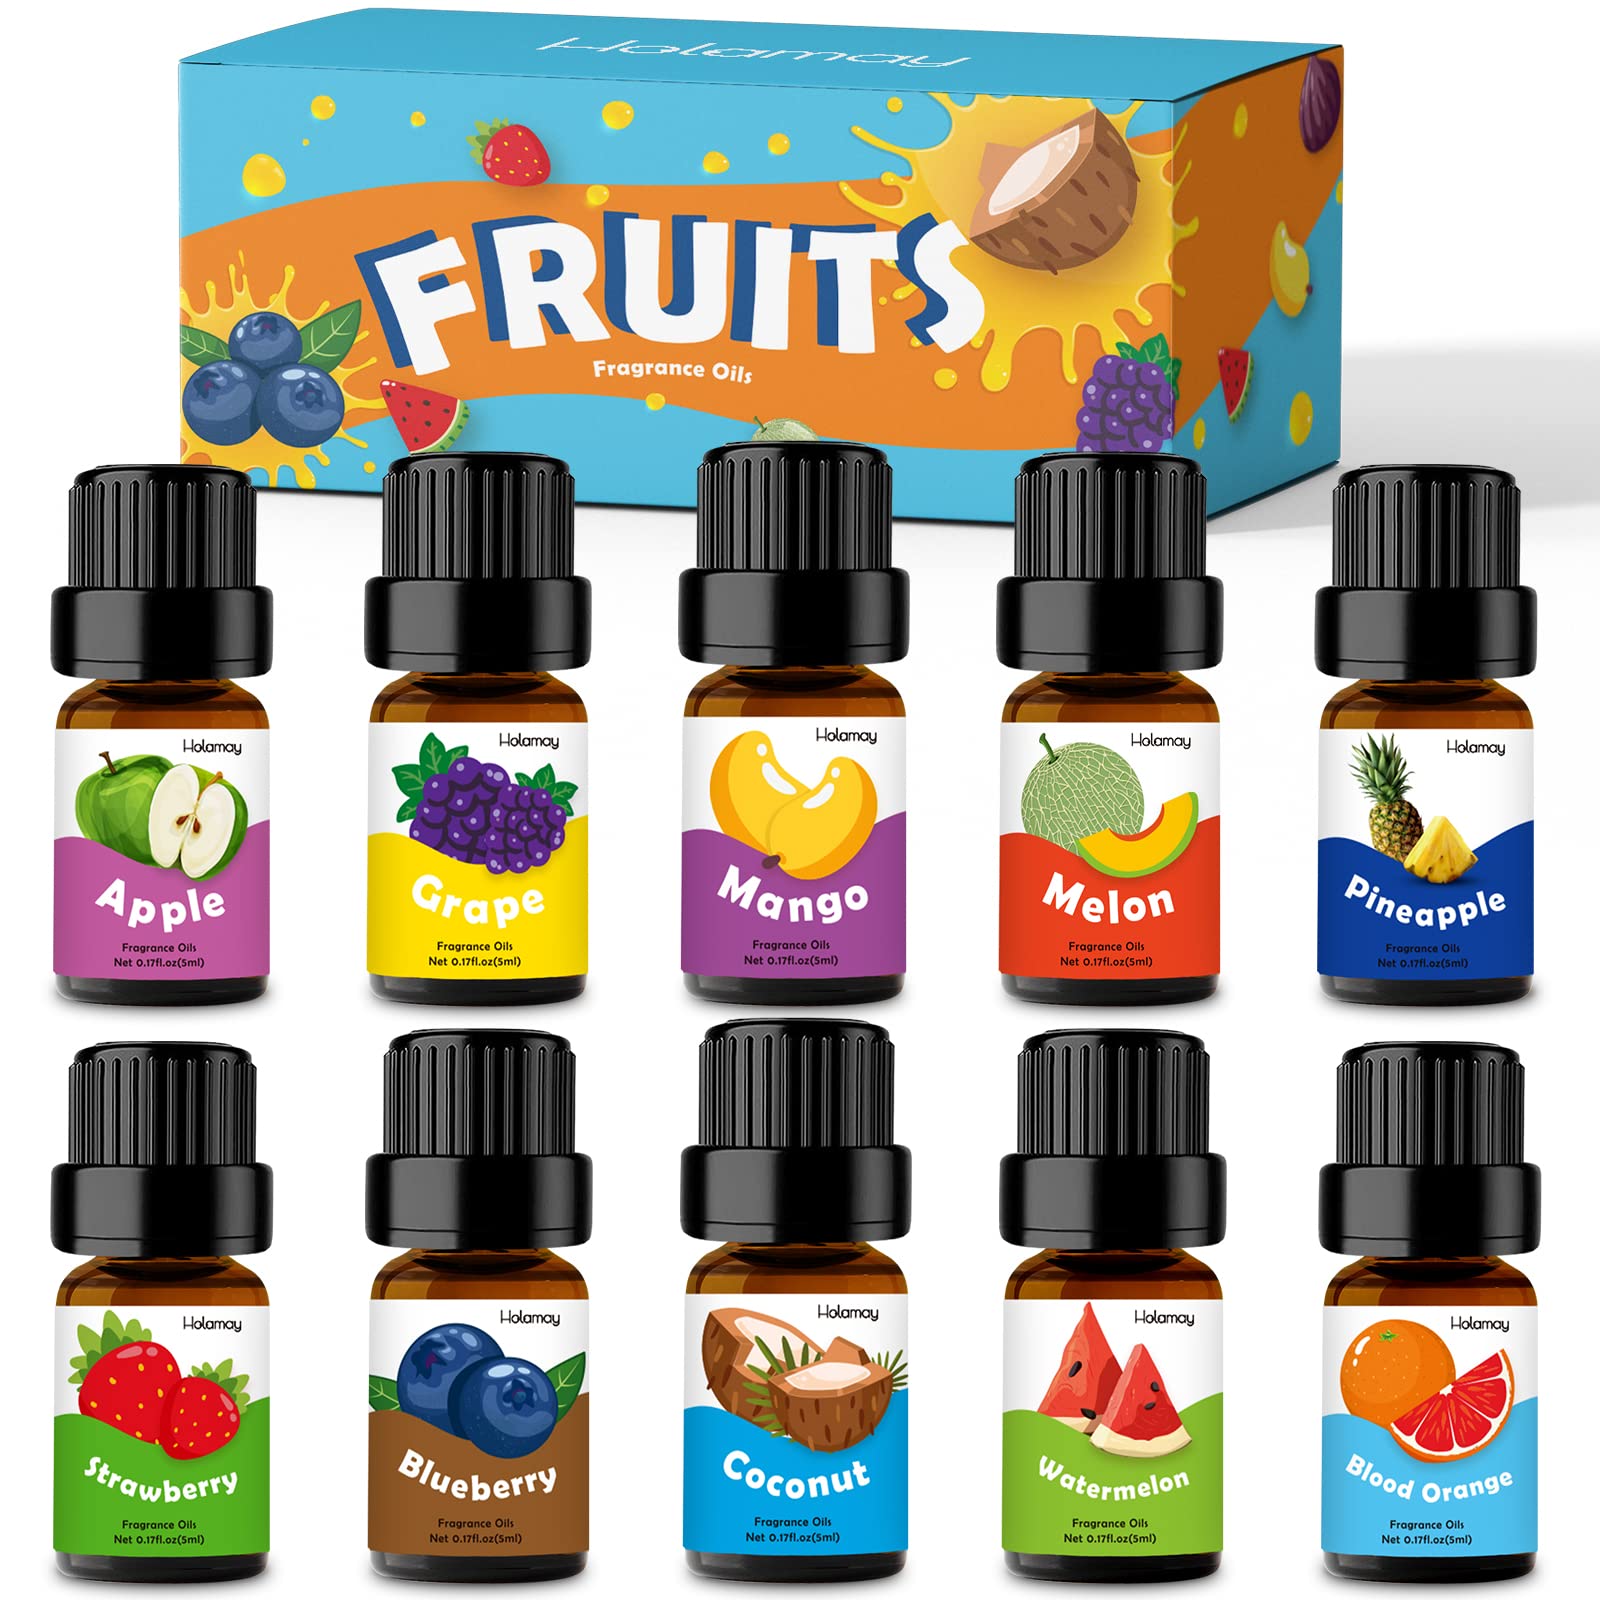 Panaro Fruity Premium Fragrance Oils (Set of 5x10ml) - Refresh Joyful Moods  at Home - Scents Include Grapefruit, Pear, Honey, Apple Figs & Lime - for  Diffusers, Candles, Sprays or Bath Bomb Making : : Home &  Kitchen